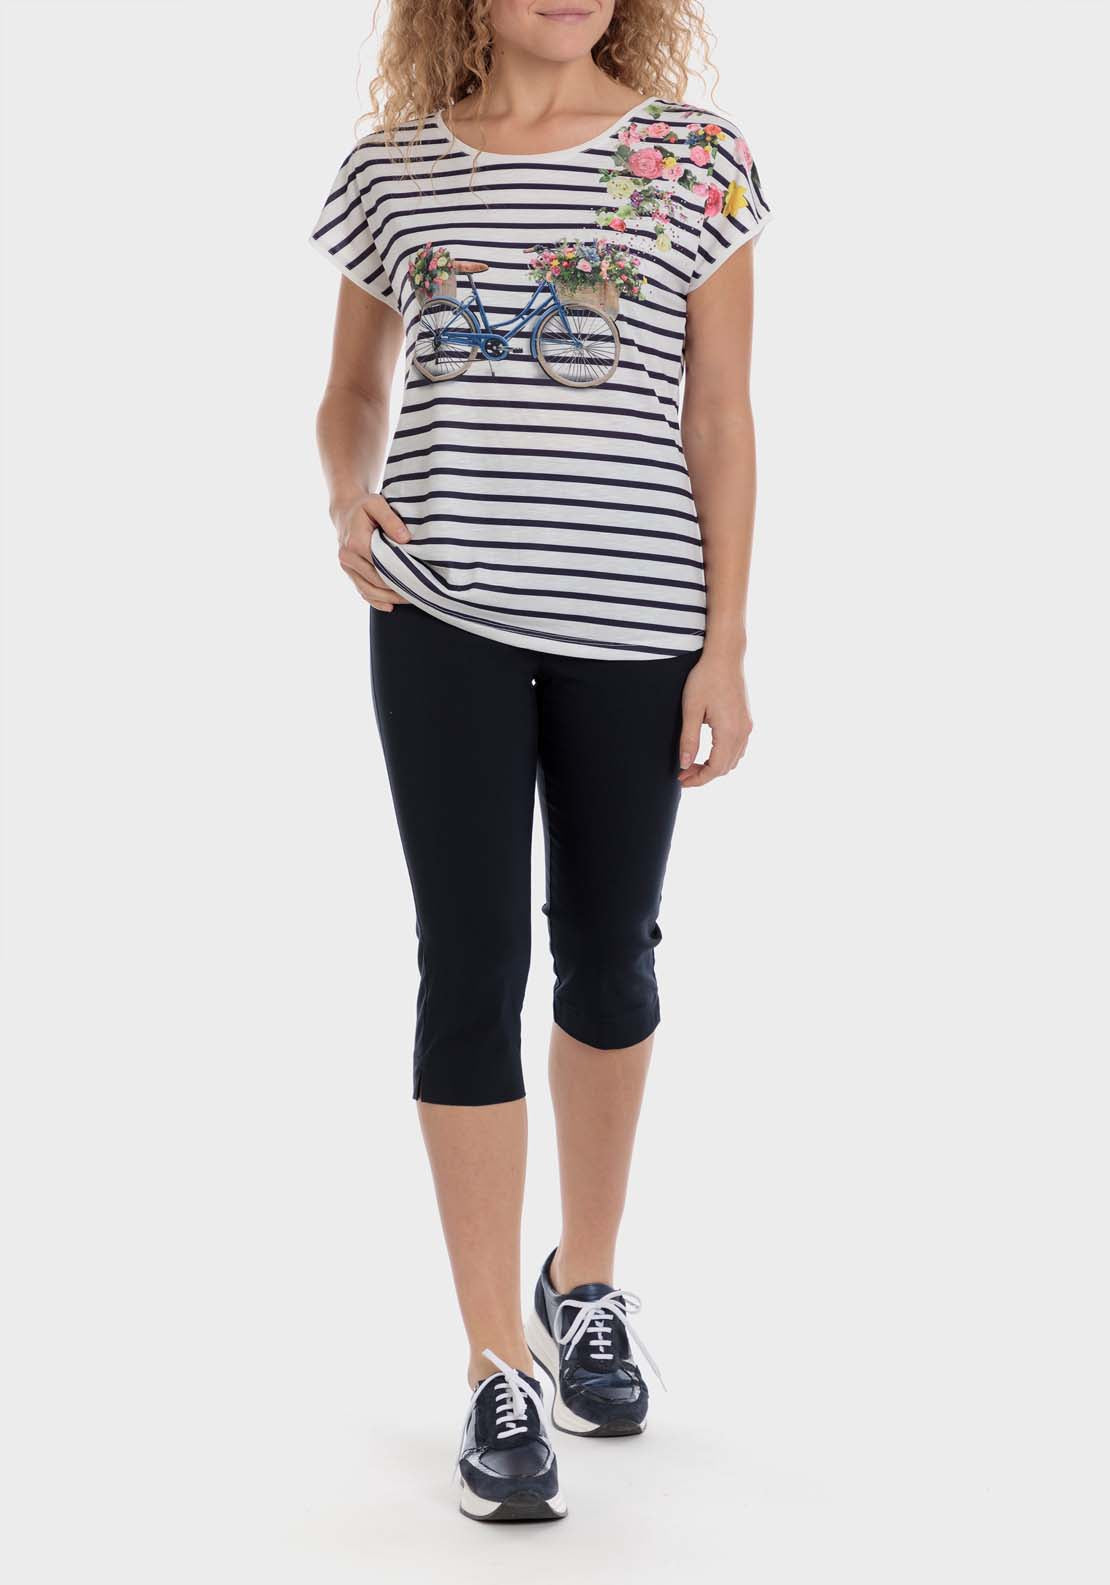 Punt Roma Floral Striped T-Shirt 3 Shaws Department Stores